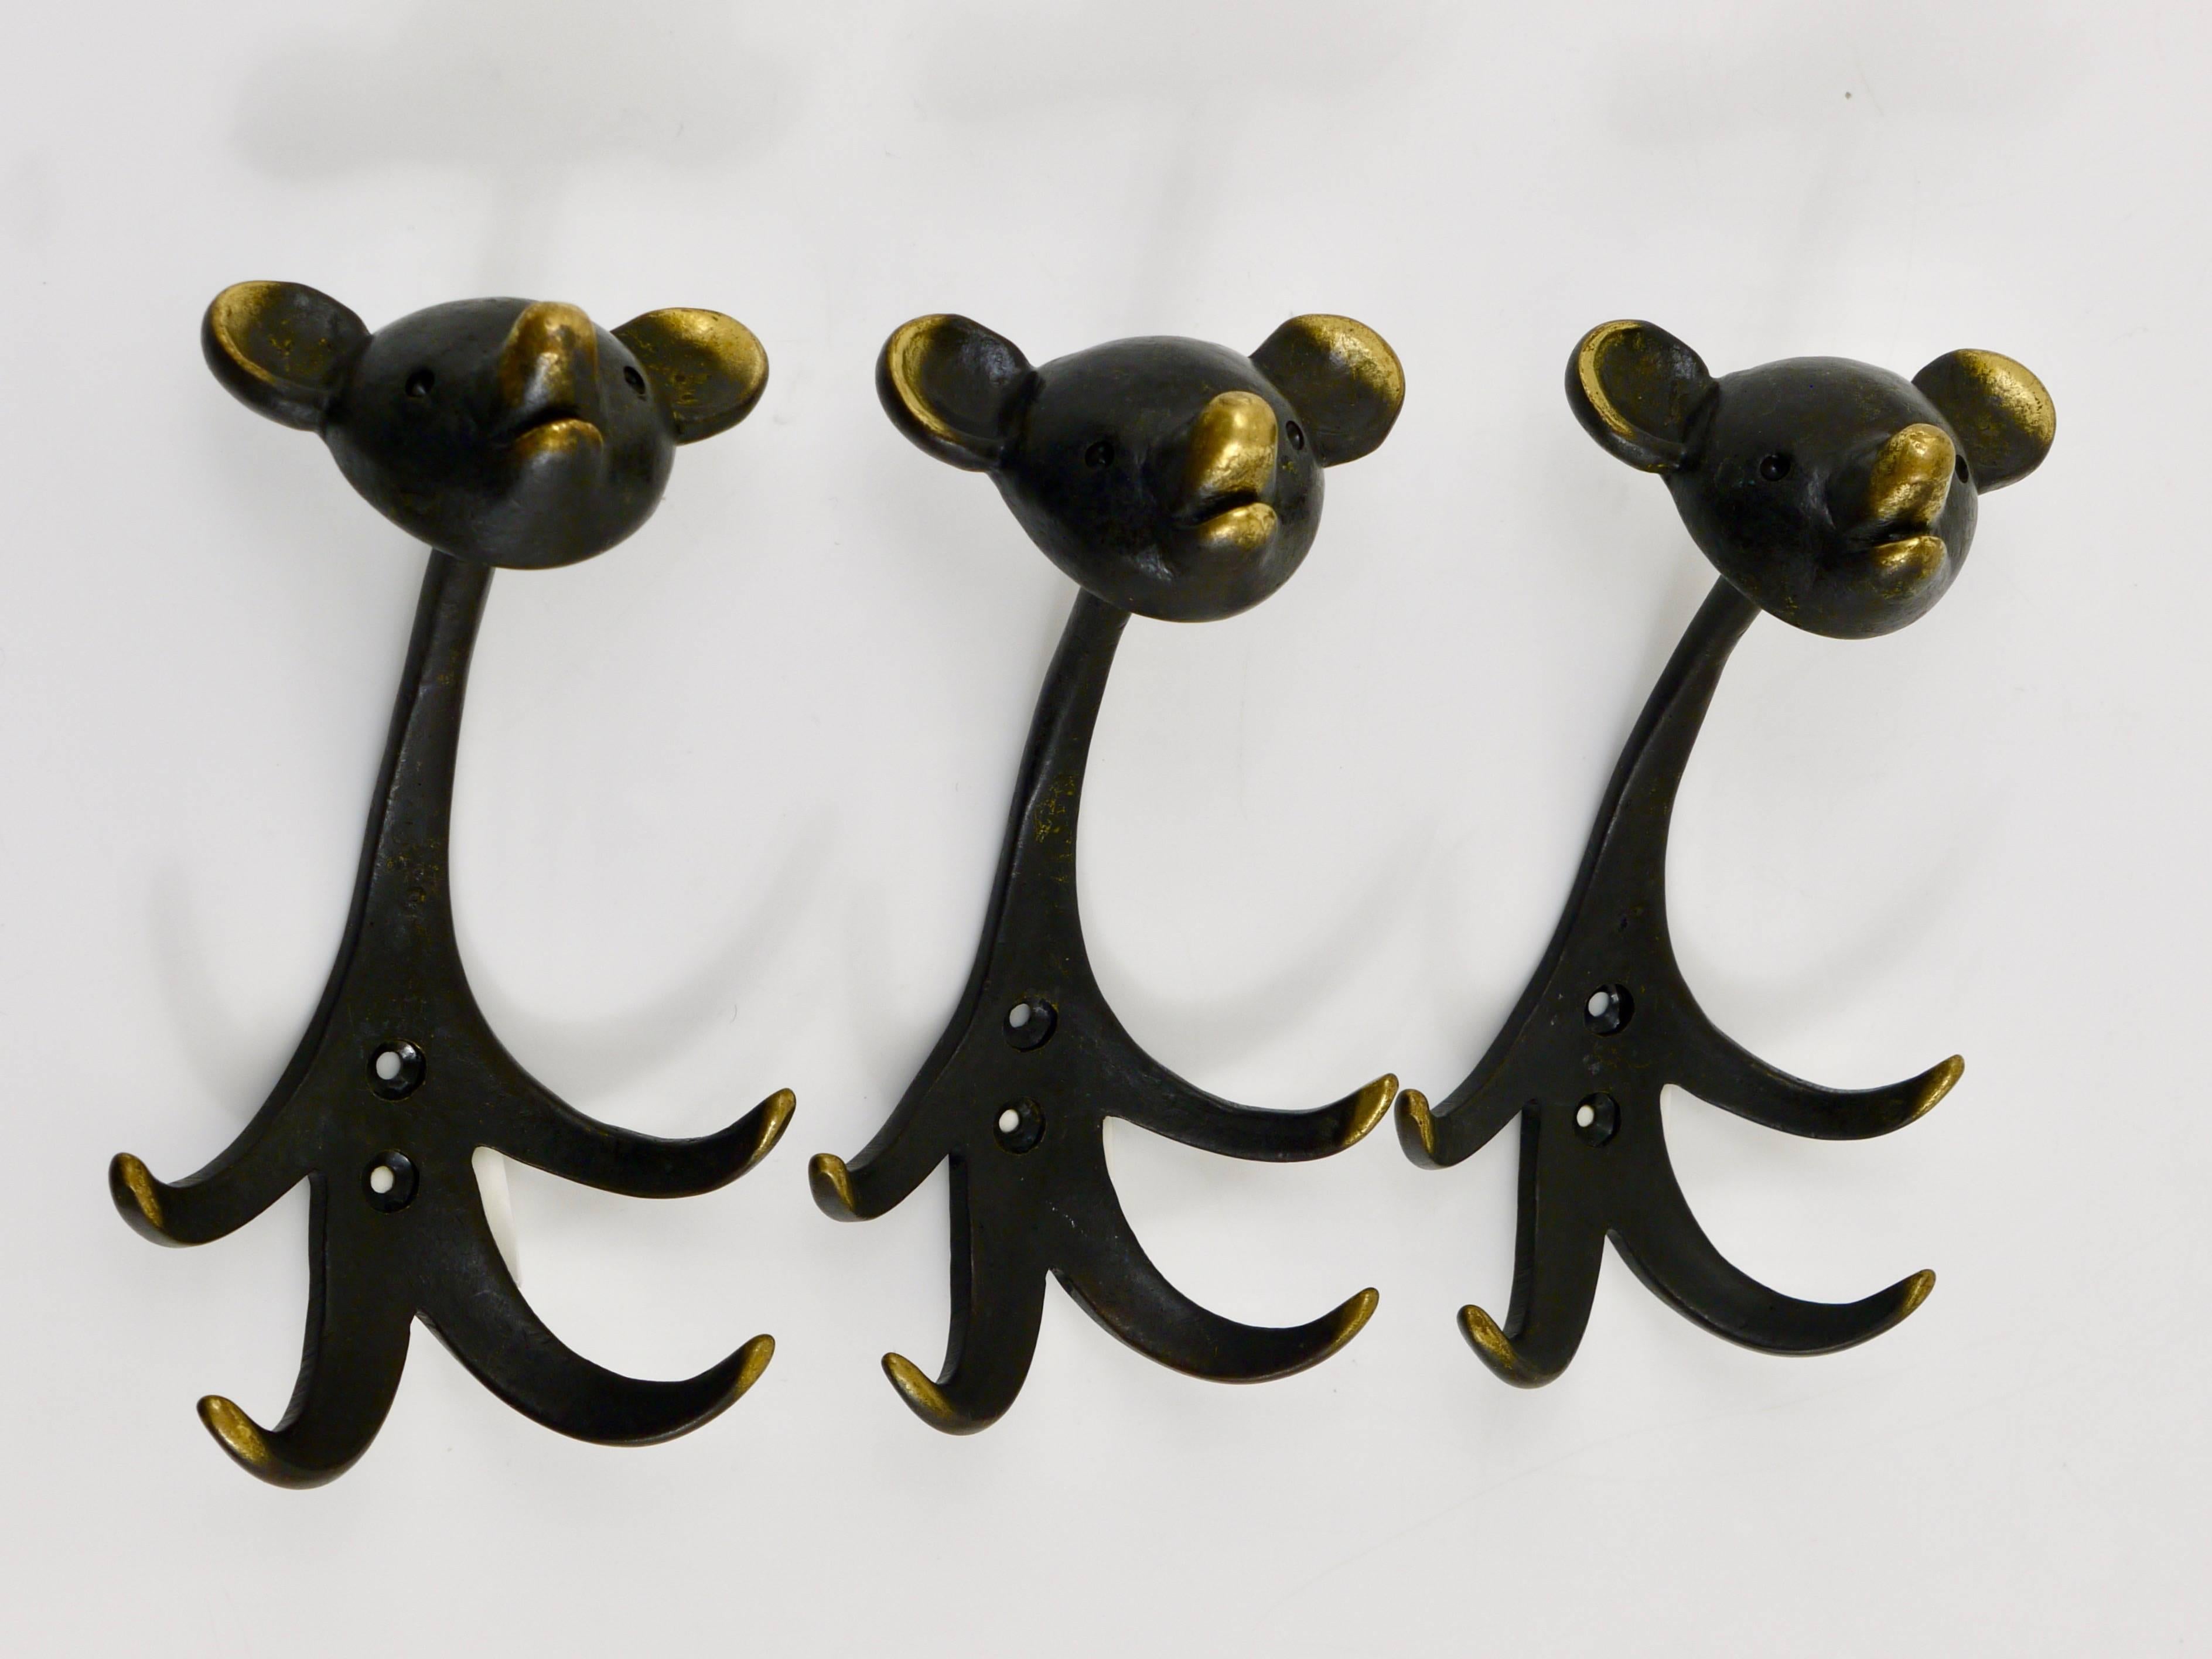 Up to two Austrian modernist brass wall coat hooks, displaying a bear. A humorous design by Walter Bosse, executed by Hertha Baller Austria in the 1950s. Made of black finished brass. In excellent condition with nice patina. Each hook has a height